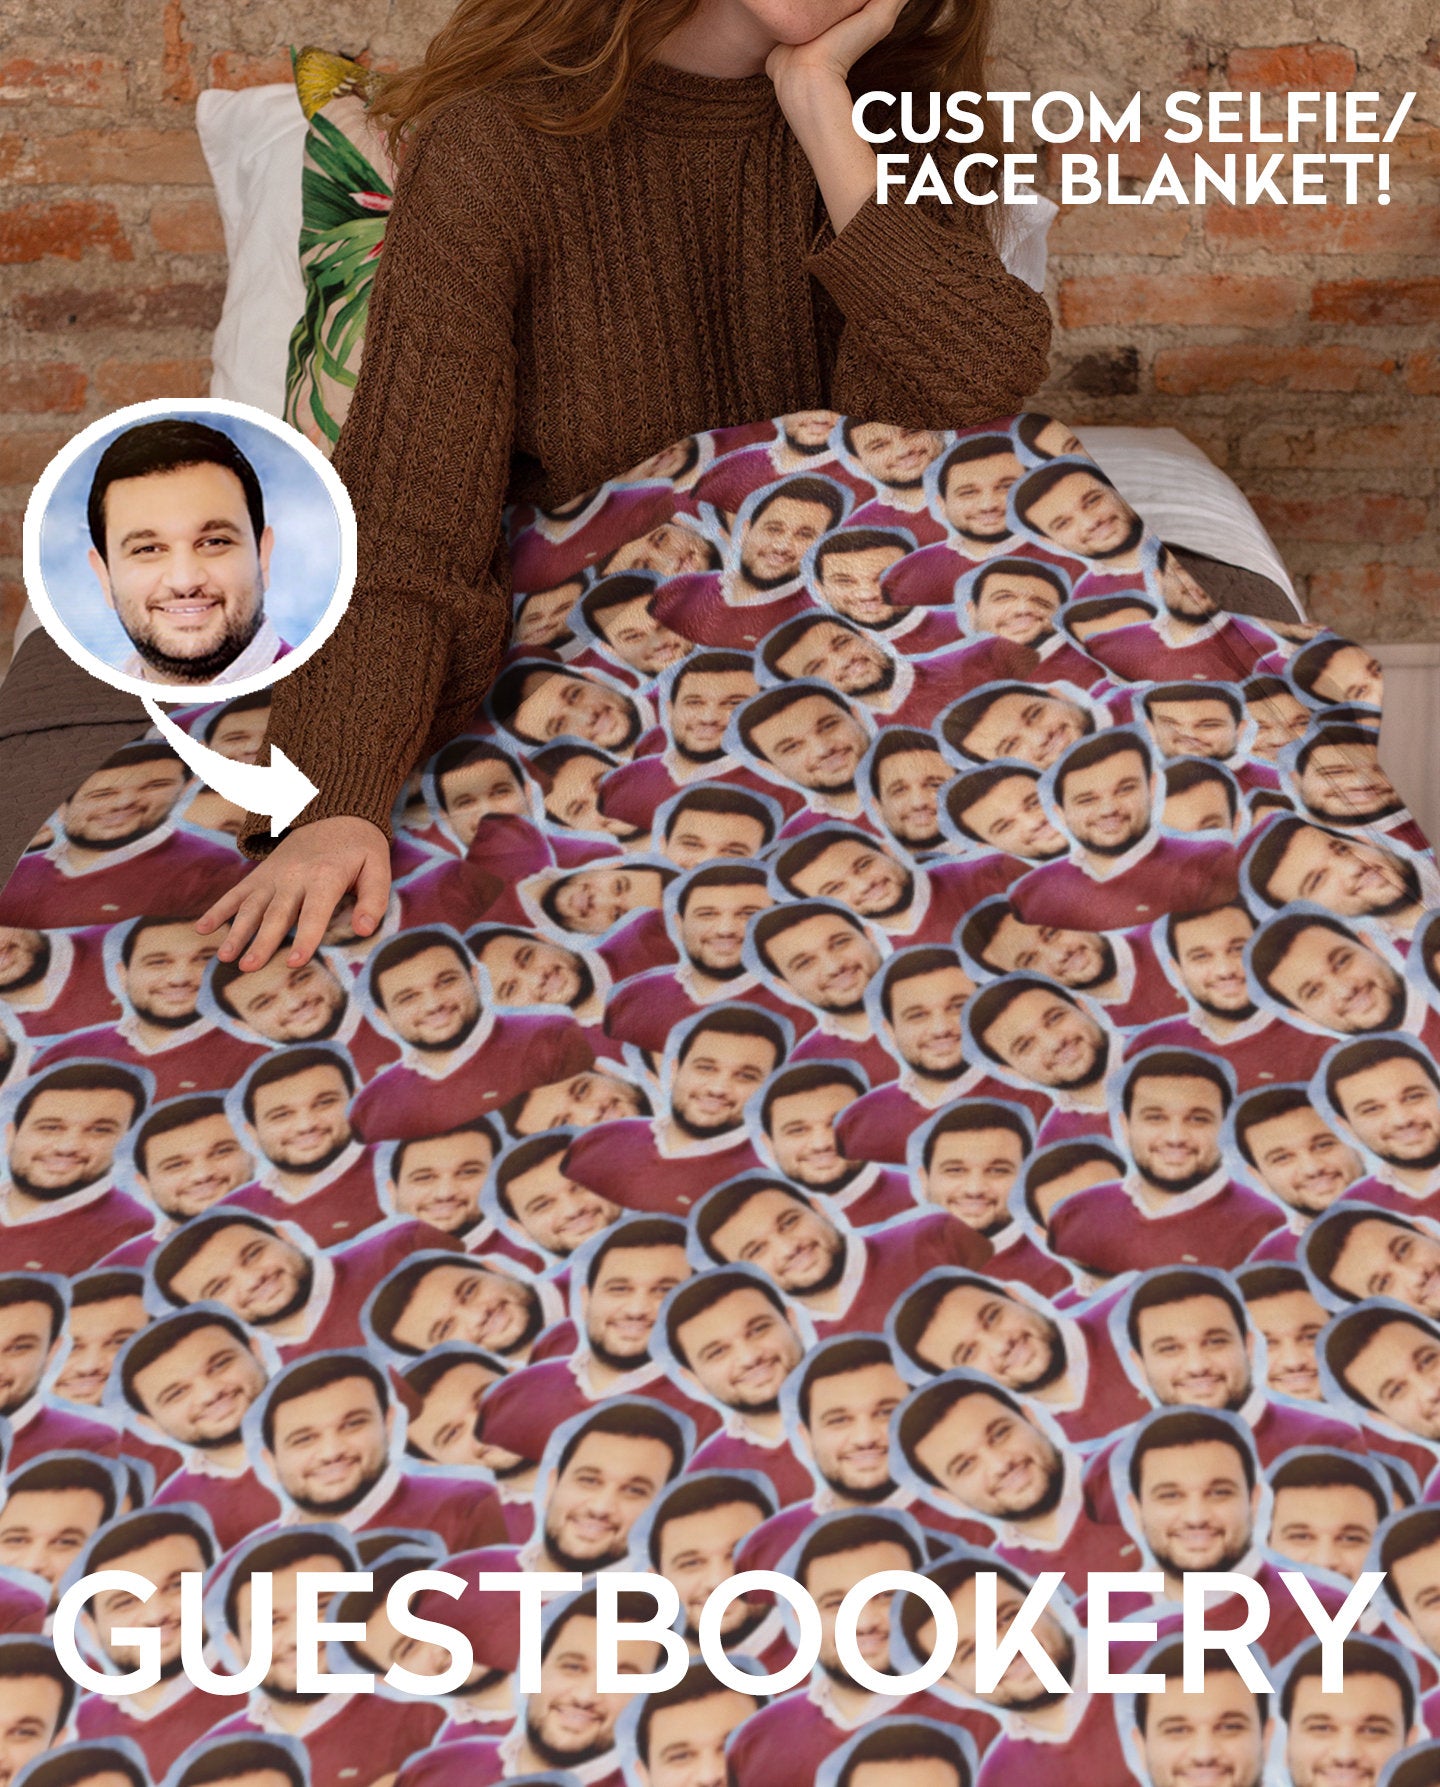 Custom Faces Blanket - Guestbookery